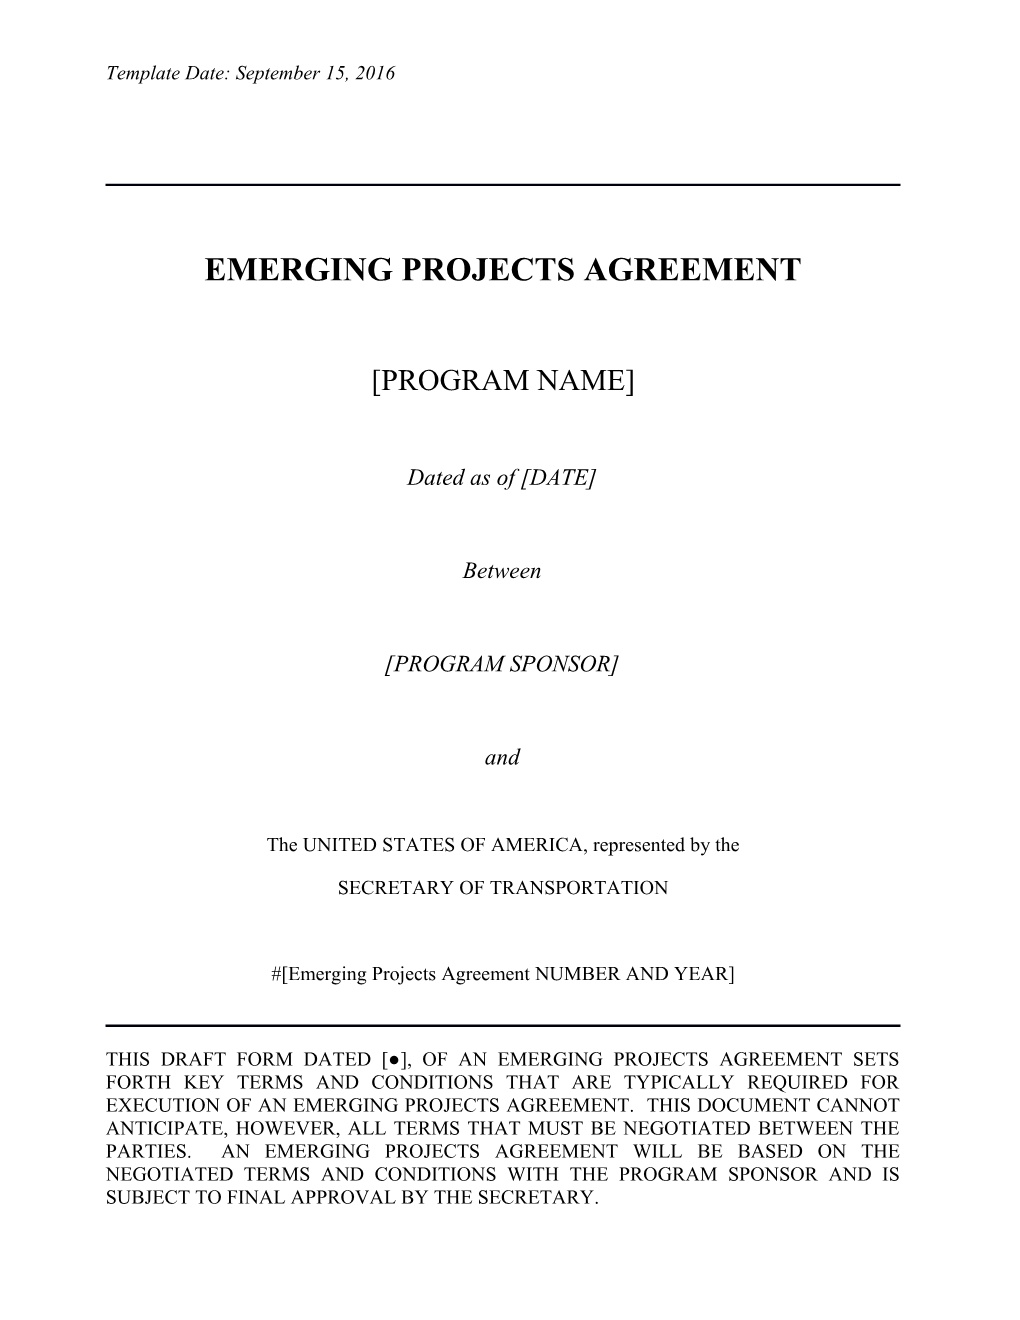 Emerging Projects Agreement